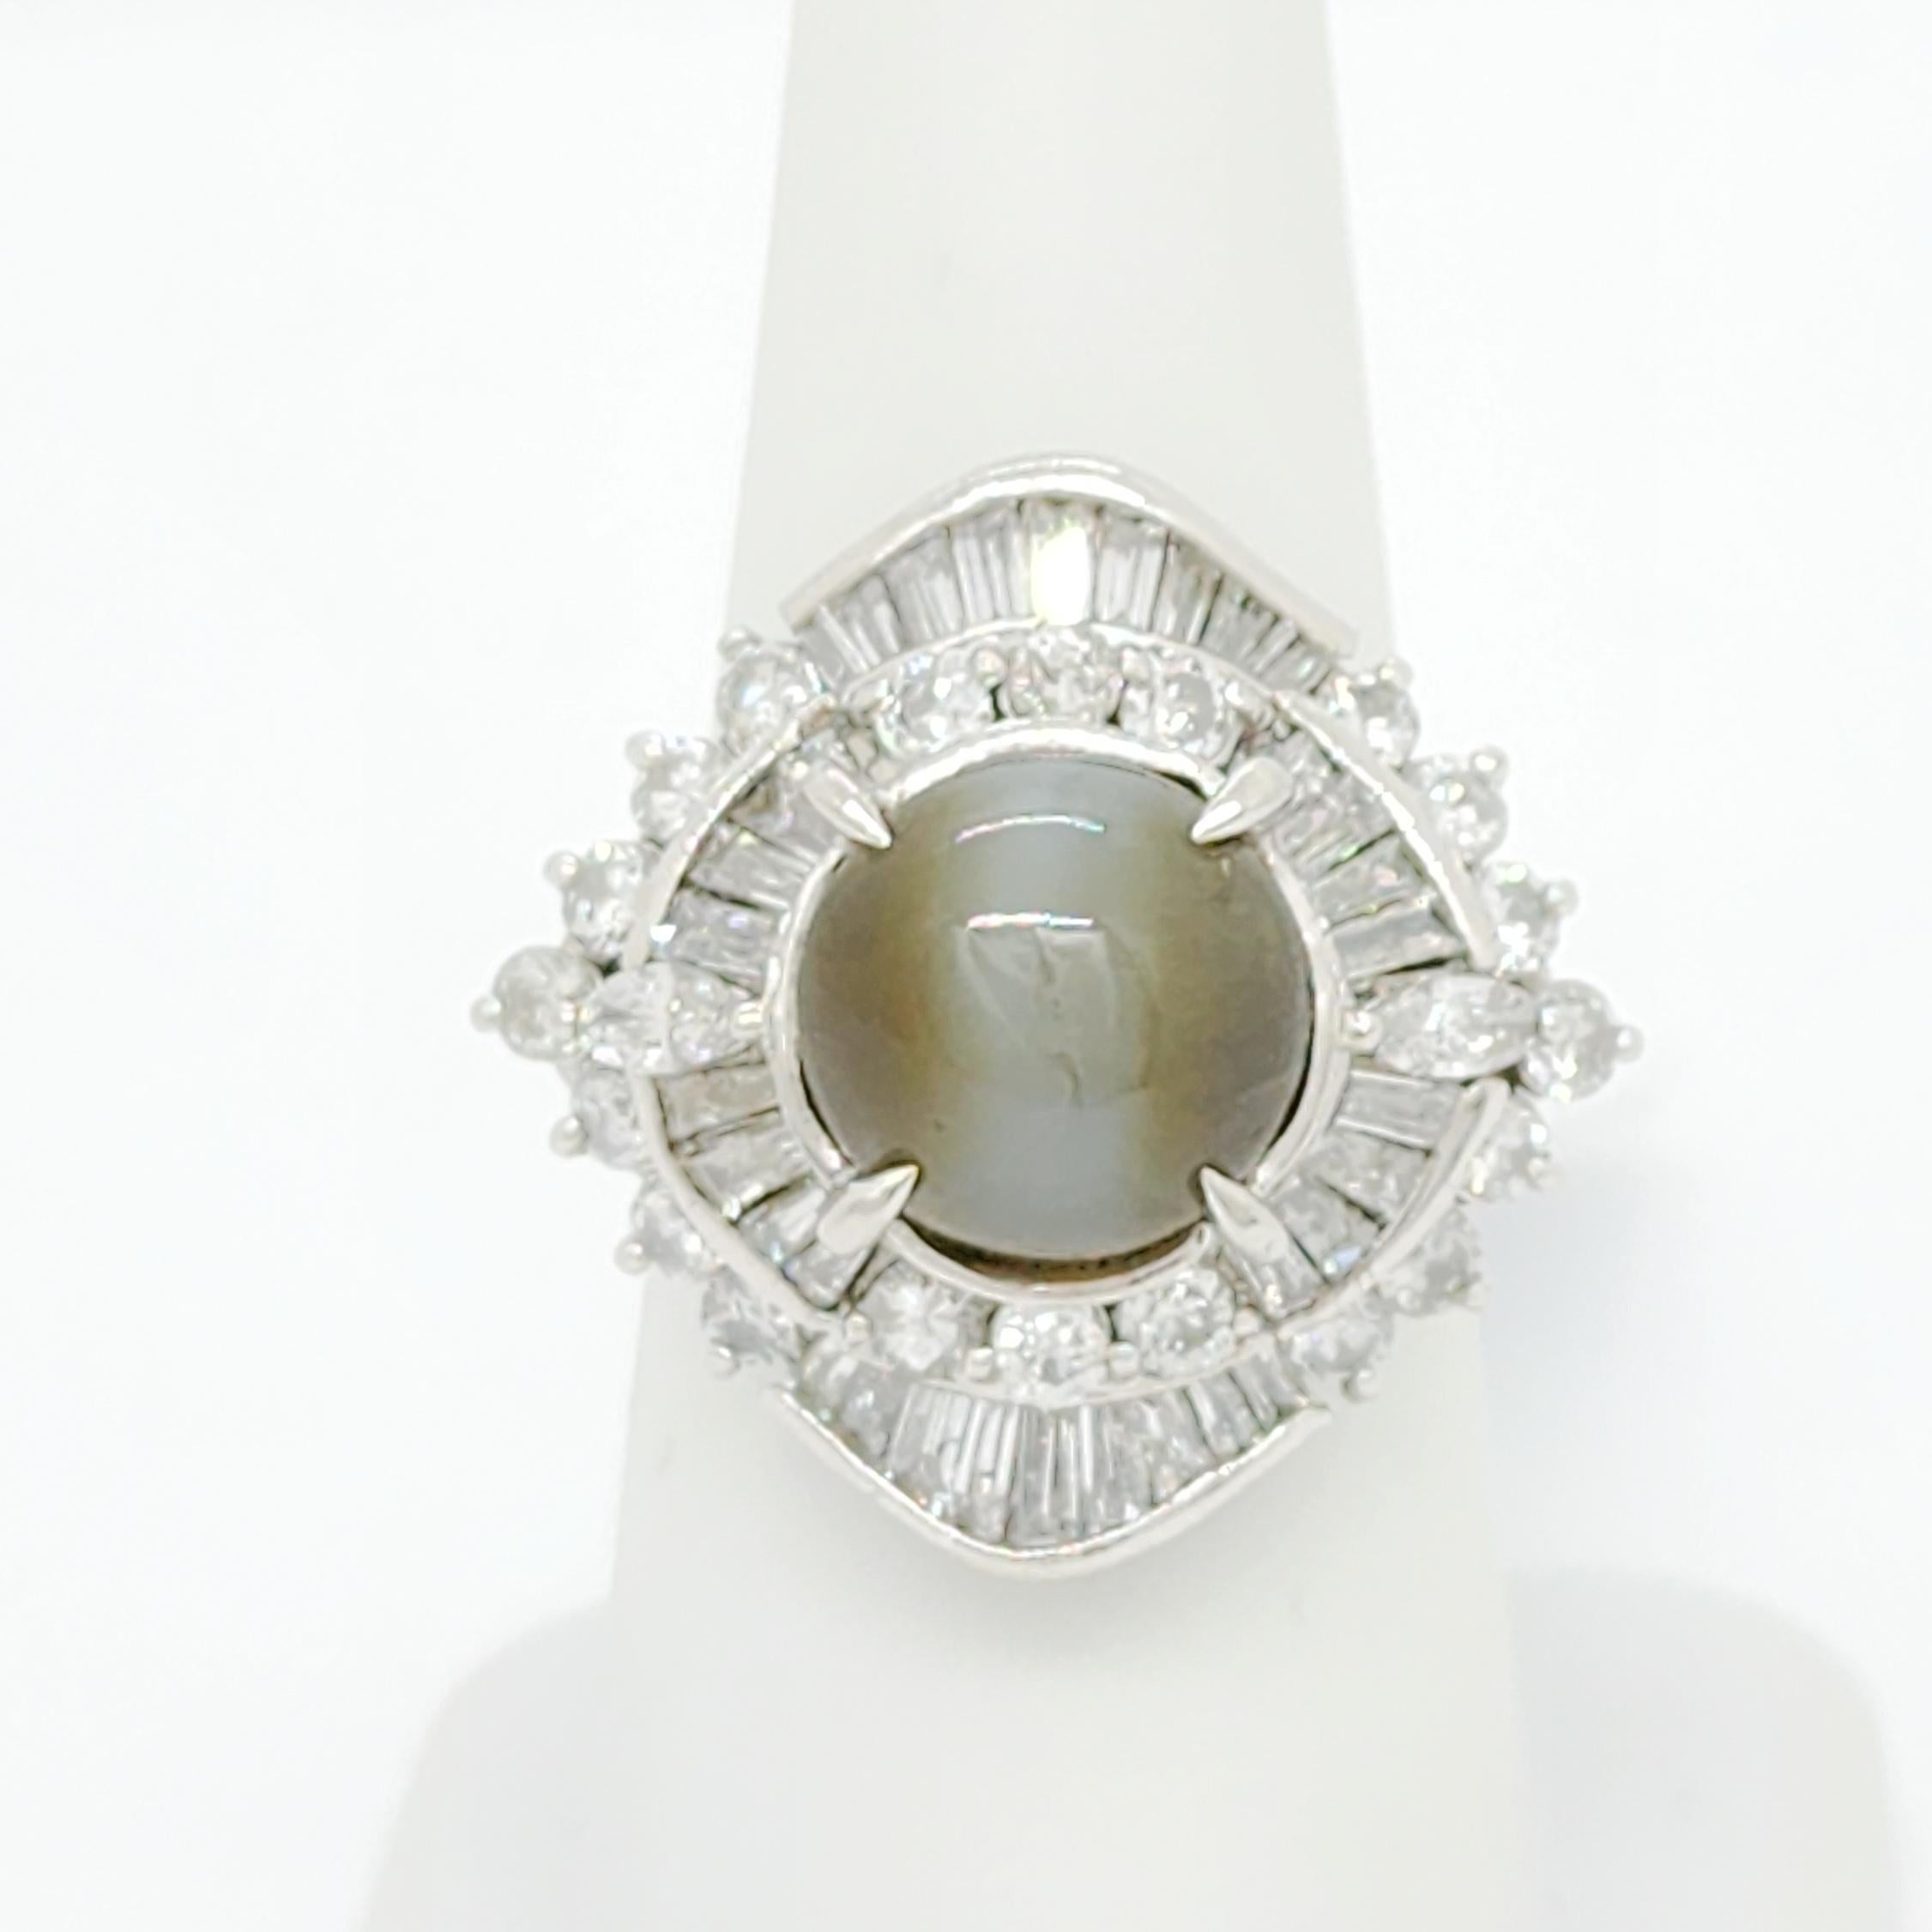 Women's or Men's Cat's Eye Chrysoberyl Cabochon Round and White Diamond Cocktail Ring